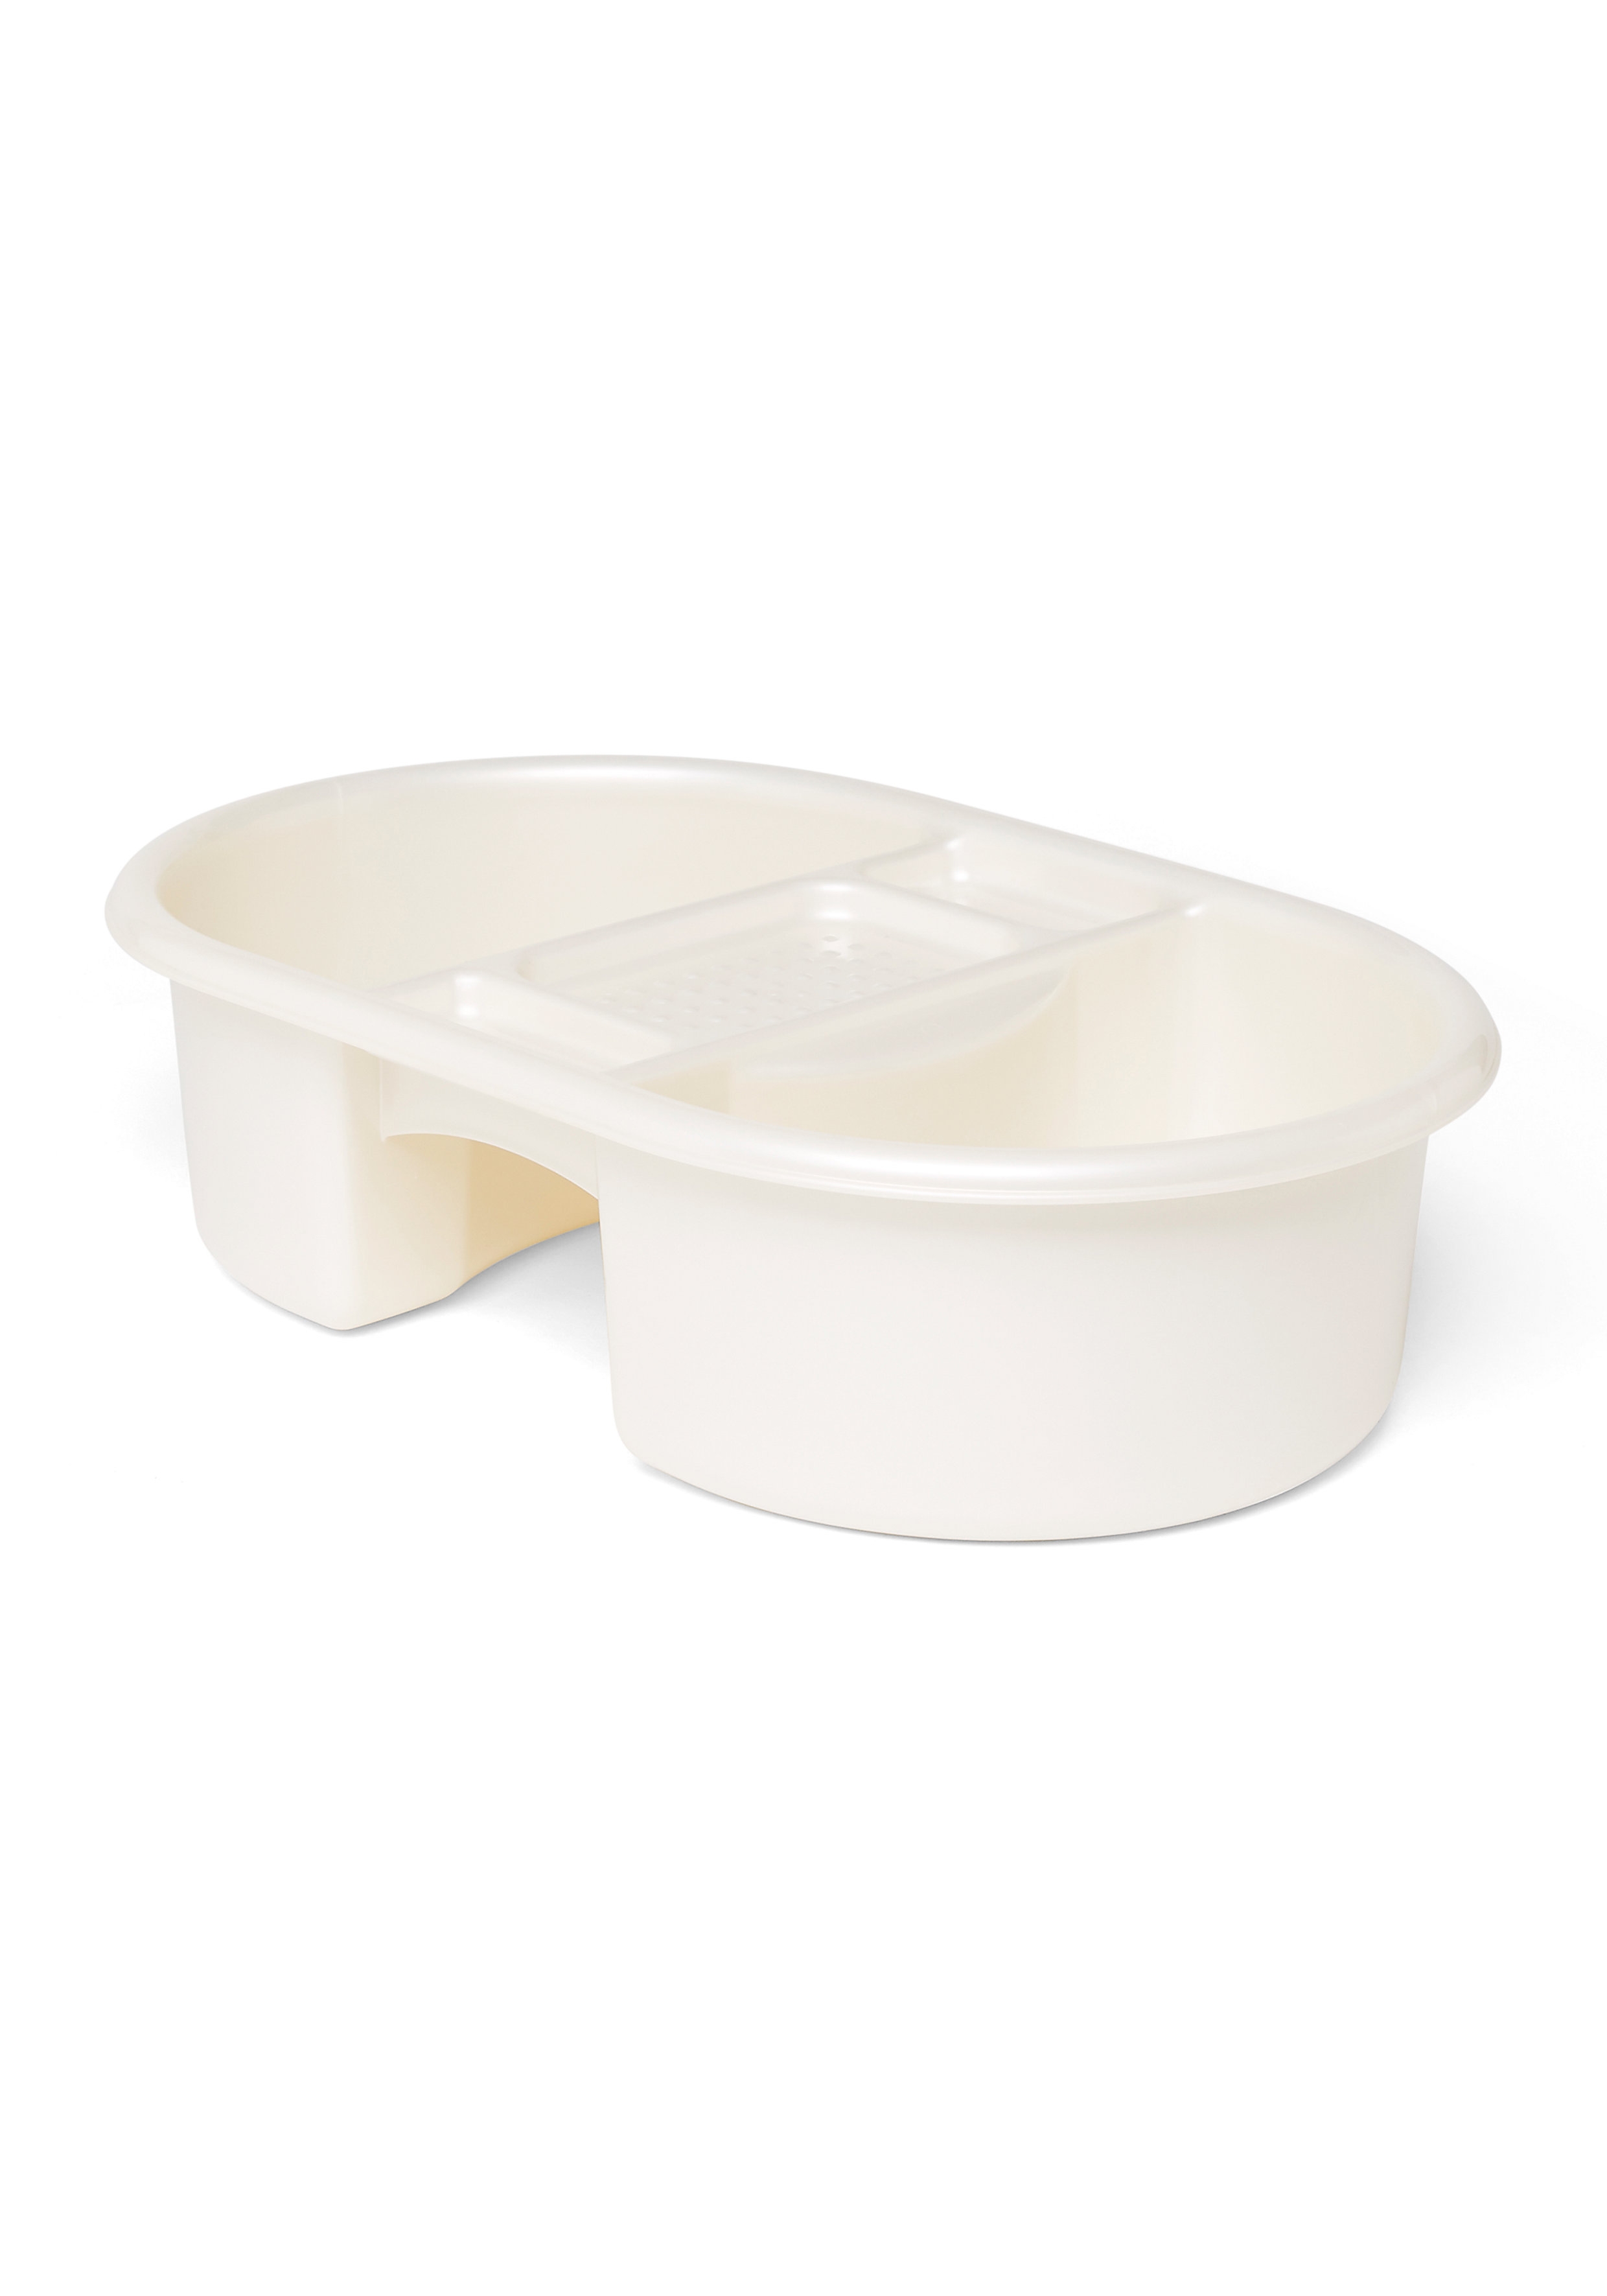 Mothercare | Mothercare New Bear Top N Tail Bowl White